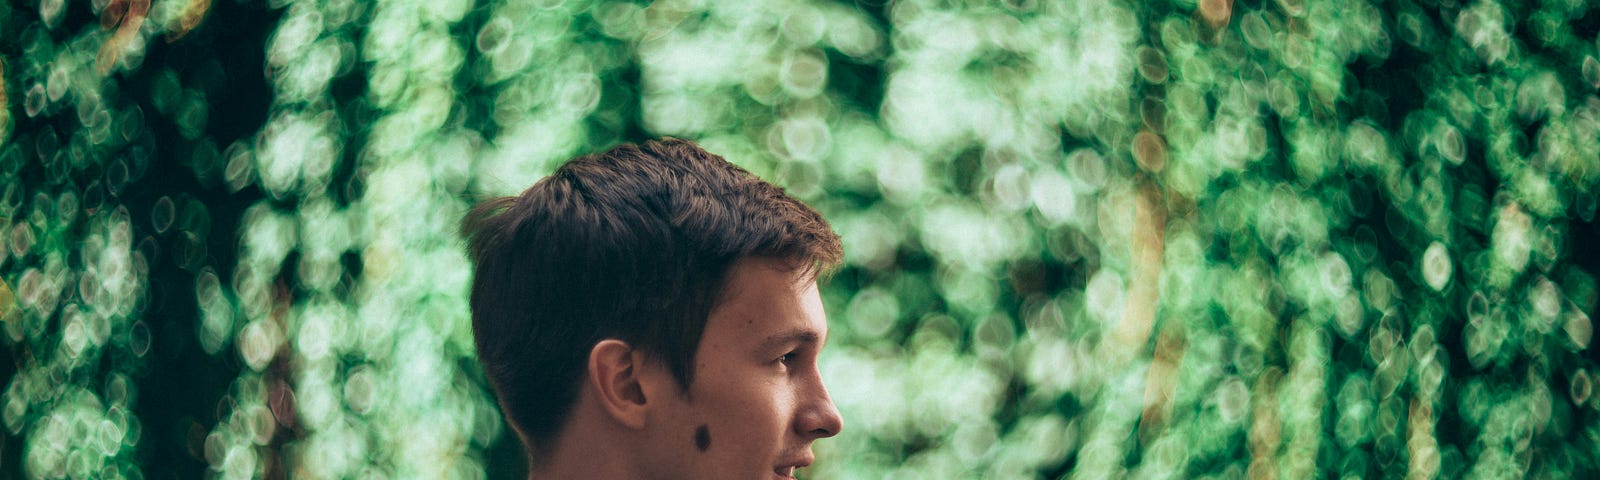 A young man turns his face in profile and looks to his left in front of a swirling green background